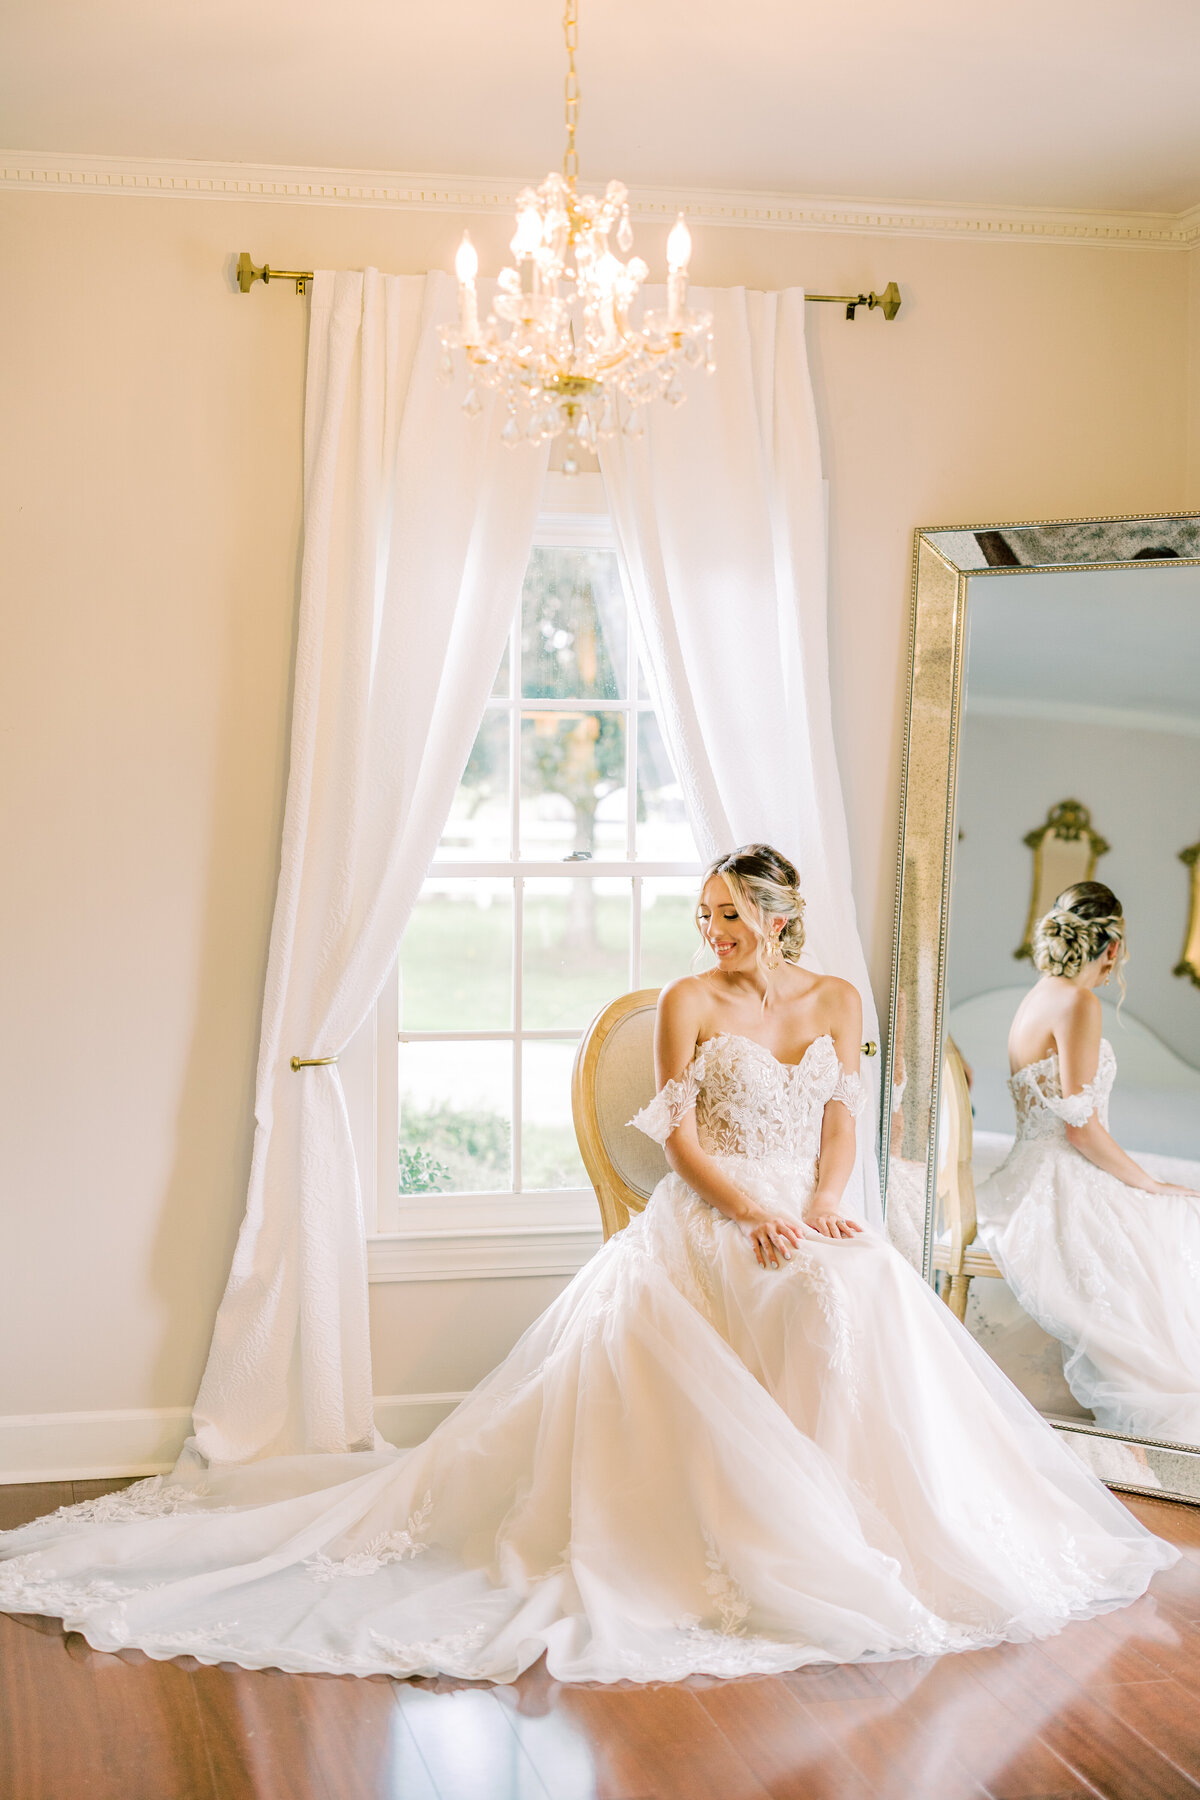 Bride sitting on chair in front of mirror